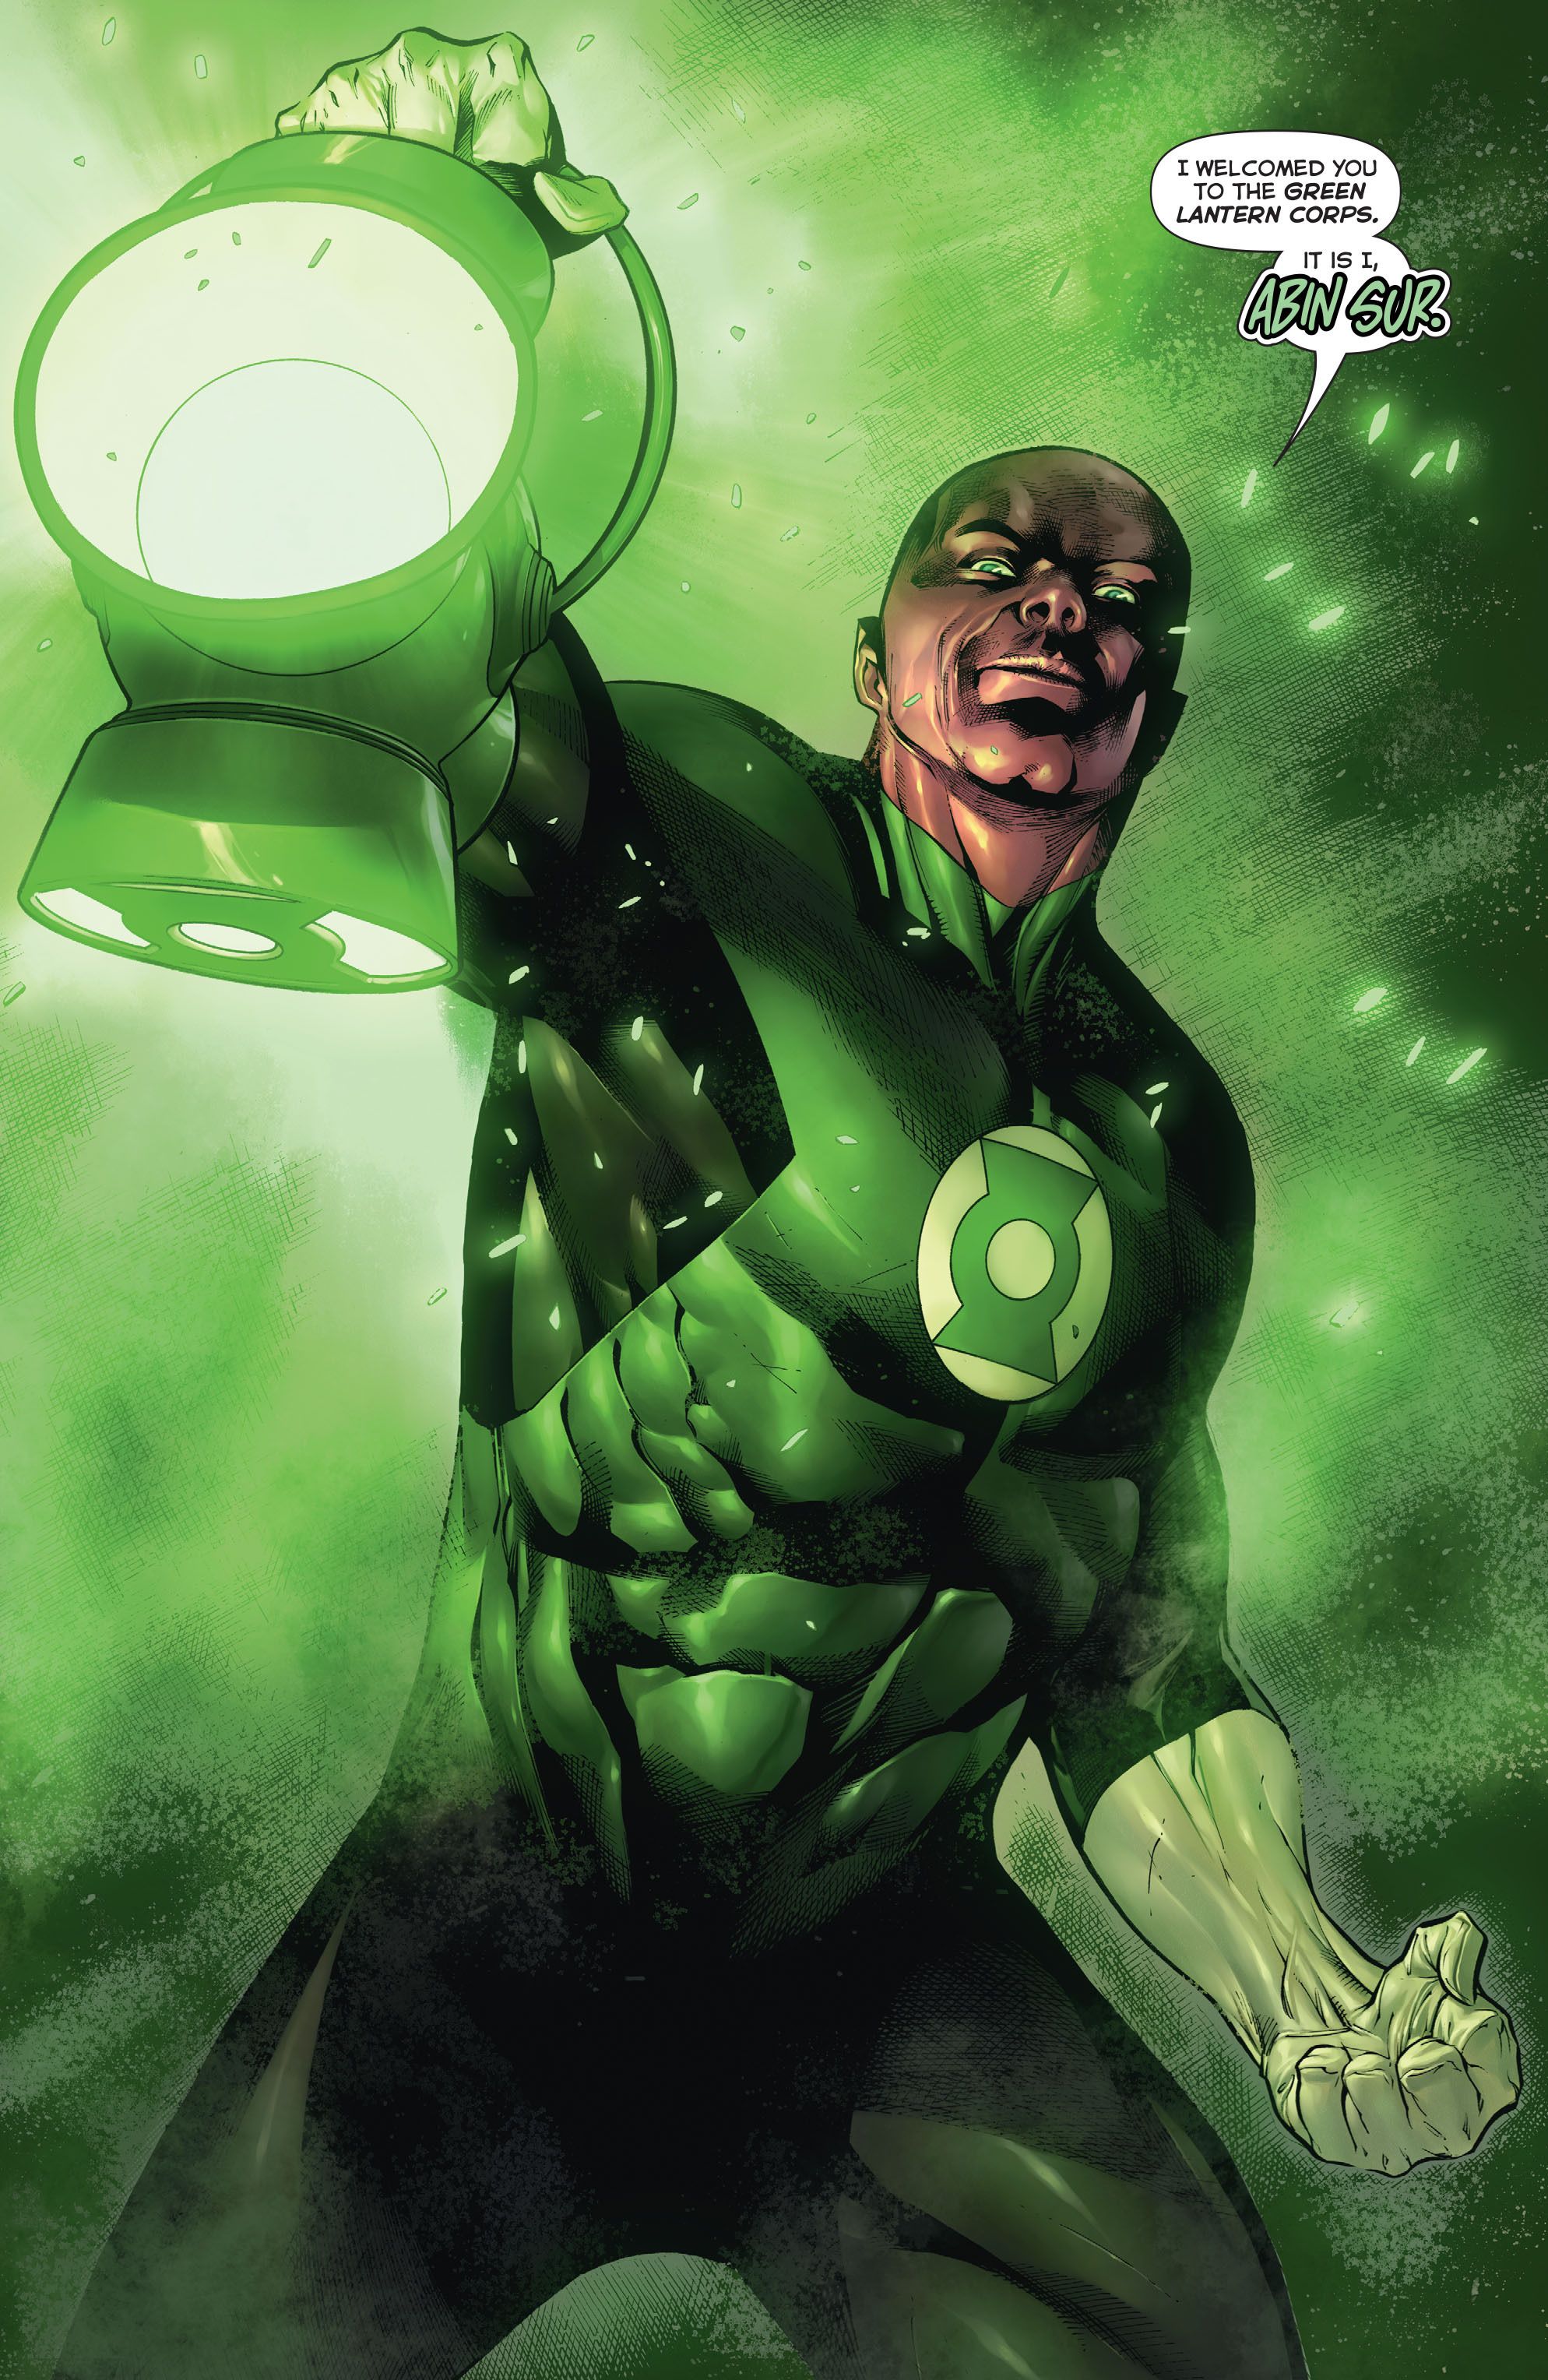 DC Comics Rebirth Spoilers & Review: Hal Jordan & The Green Lantern Corps Has The Much Hyped Return Of Kyle Rayner, But What Kind Of DC Rebirth Lantern Is He? White